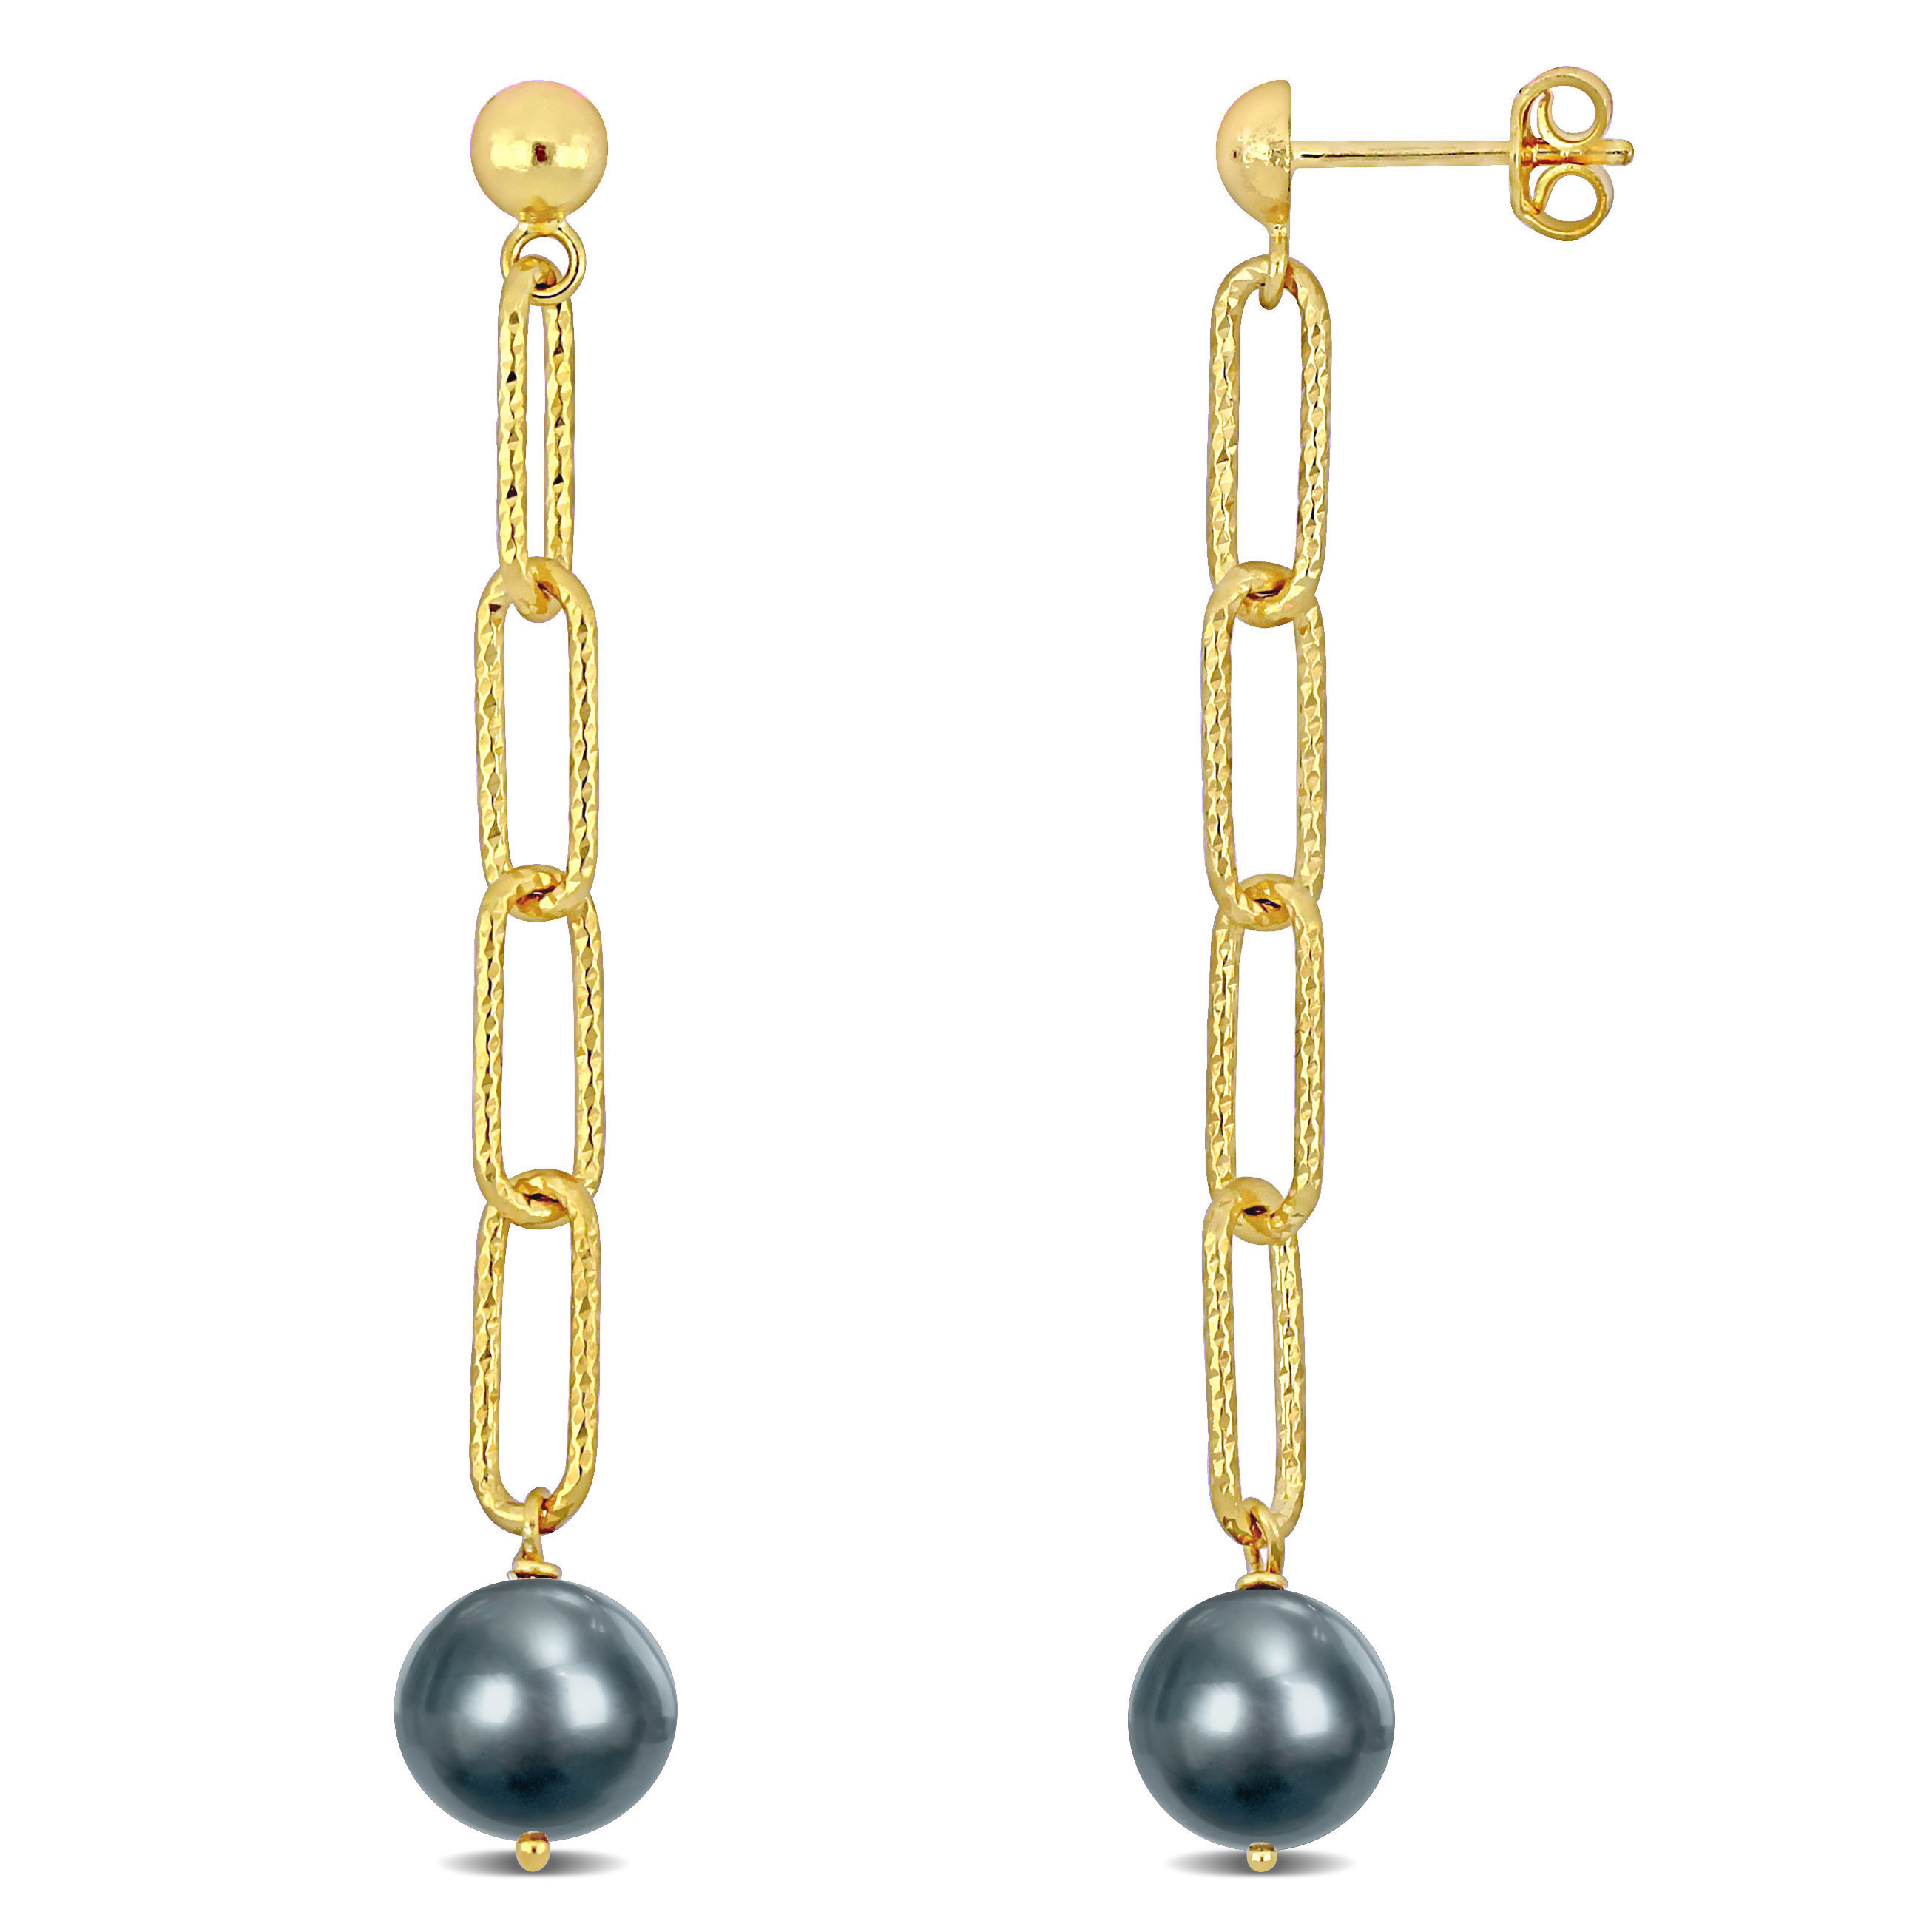 9-10 MM Dyed Grey Cultured Freshwater Pearl Oval Link Earrings in 18k Yellow Gold Plated Sterling Silver